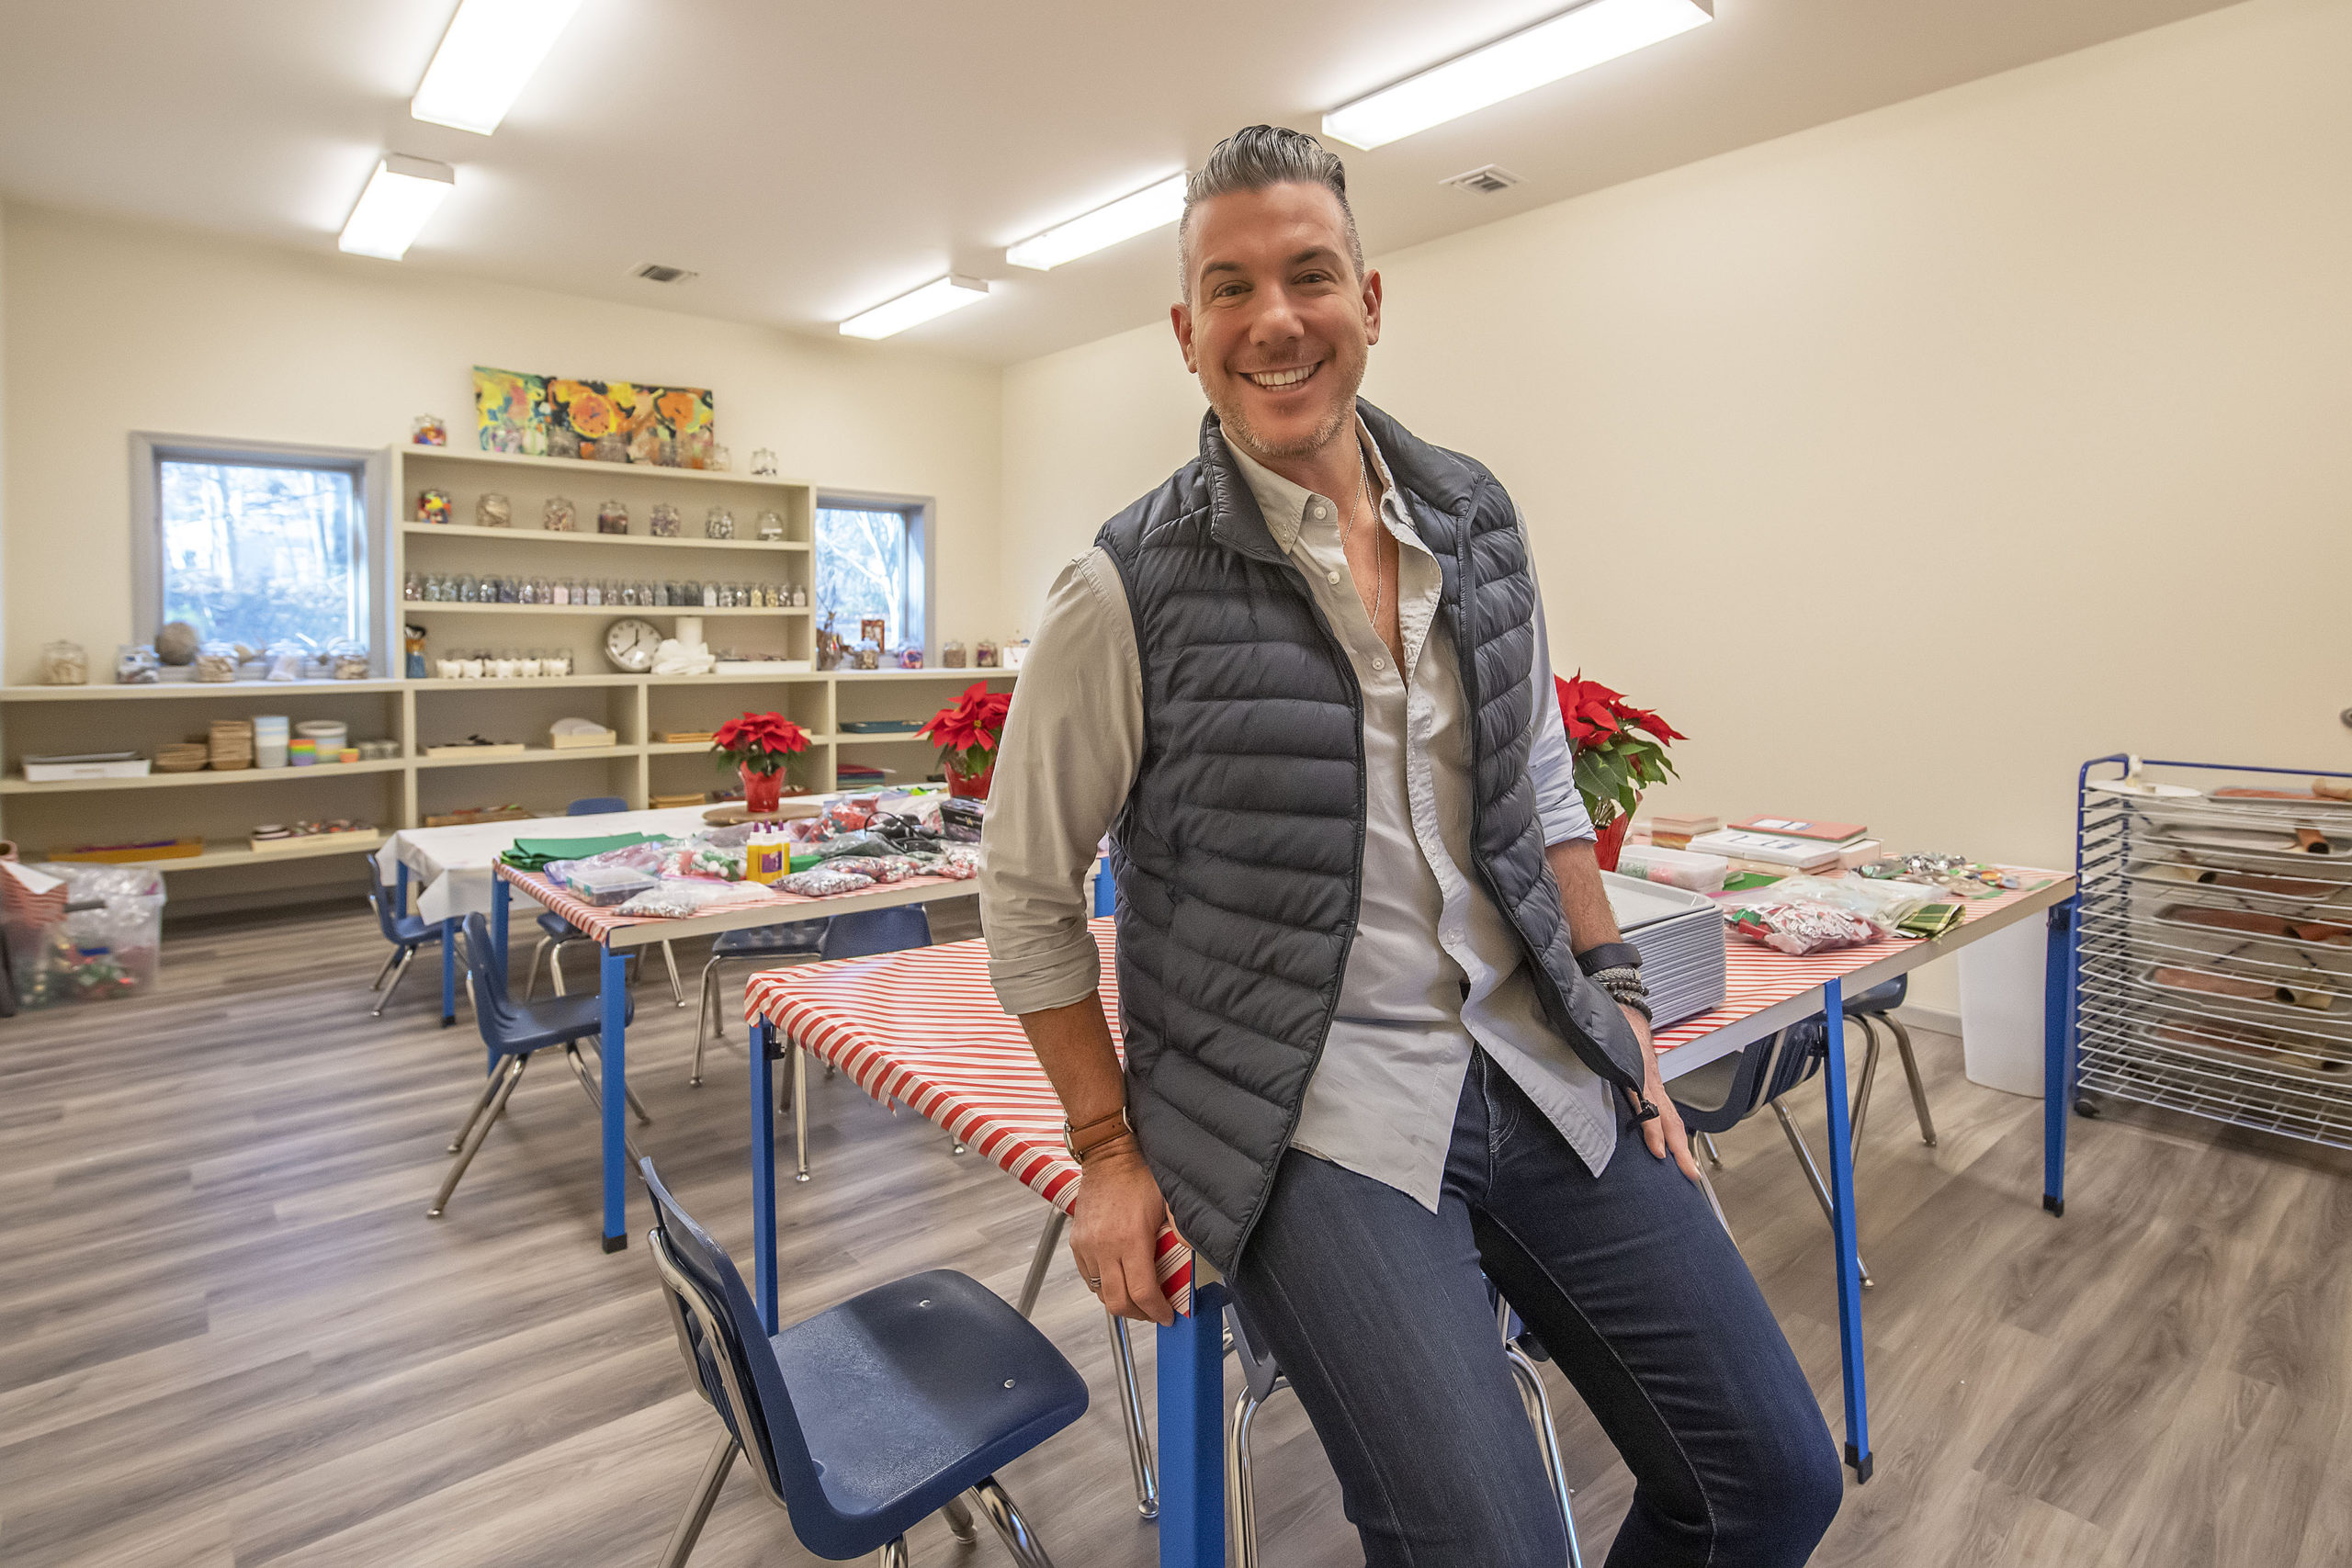 Aaron Goldschmidt at the new headquarters for his business, Shine, which hosts creative camps, workshops, and parties for kids. He took over the space on the Sag Harbor Bridgehampton Turnpike that previously was home to The Rainbow School preschool.